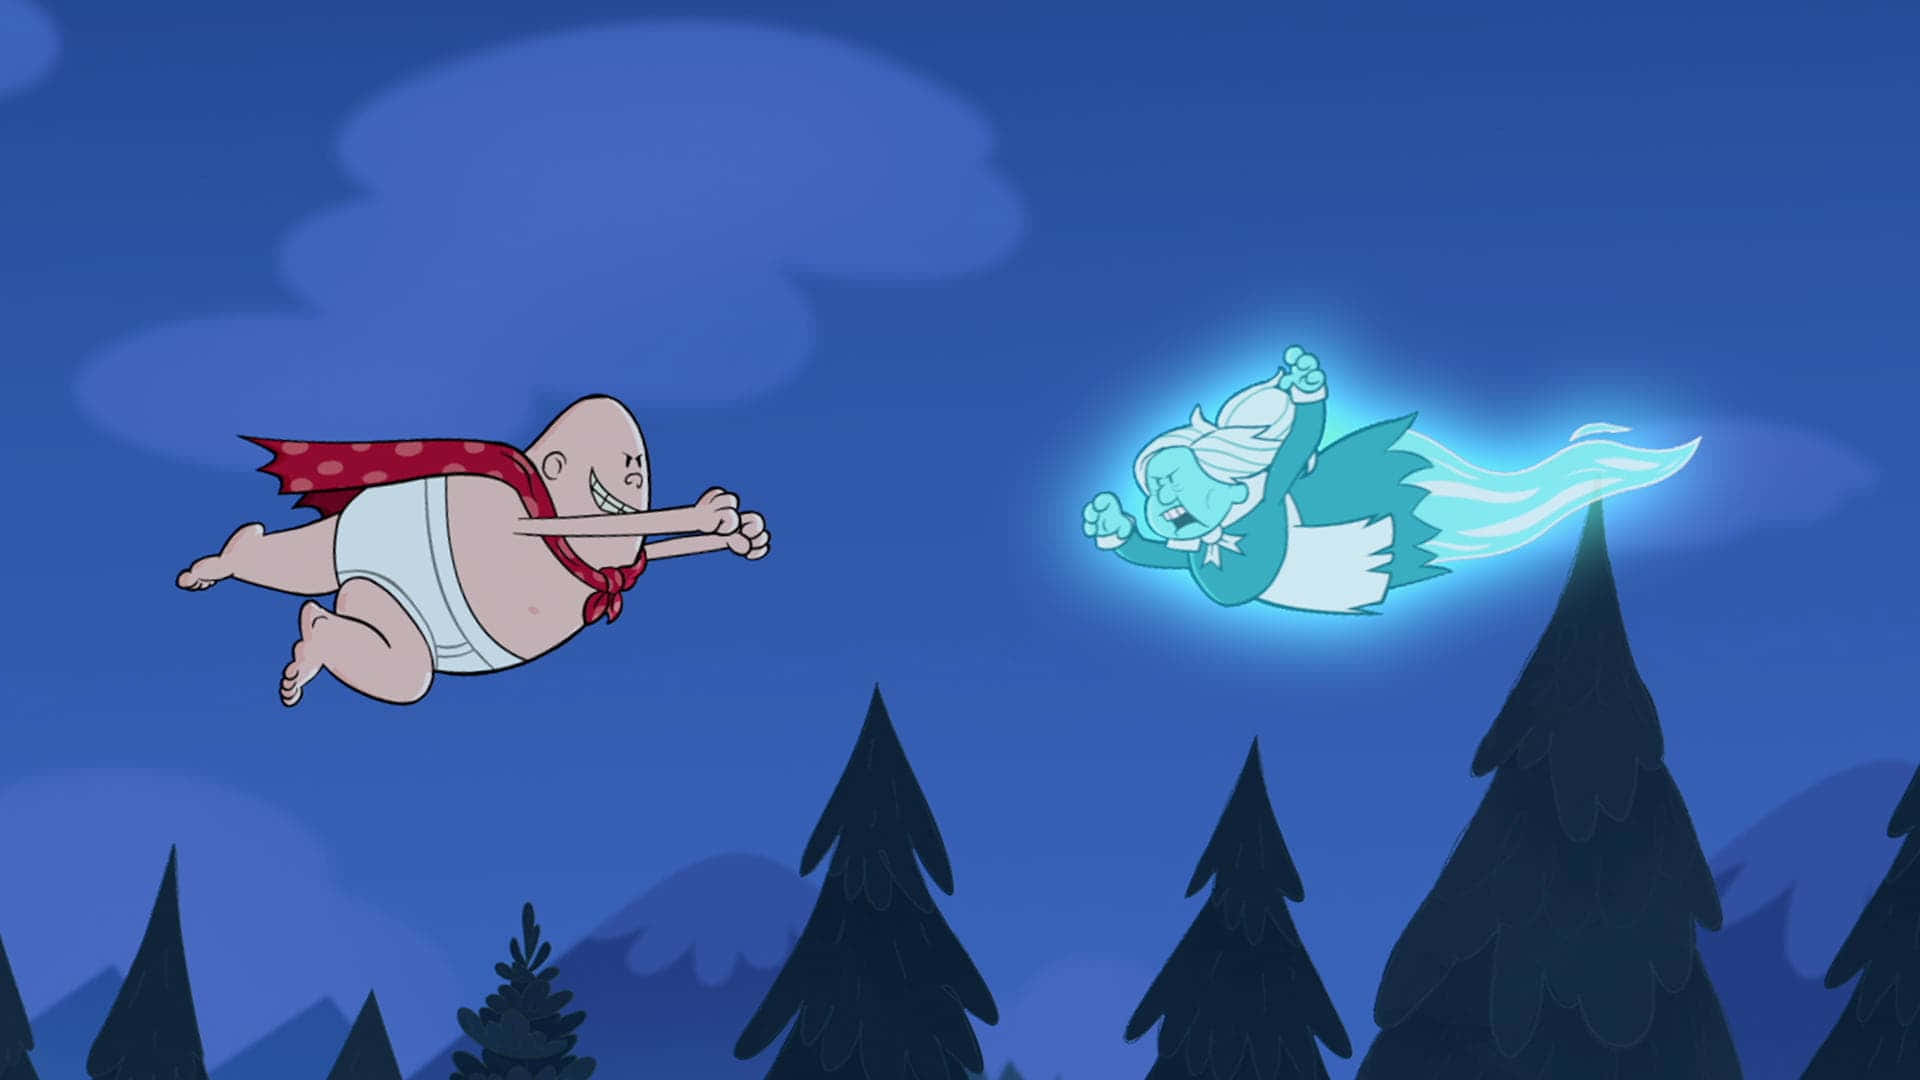 Captain Underpants Fighting Ghost In The Moonlight Wallpaper